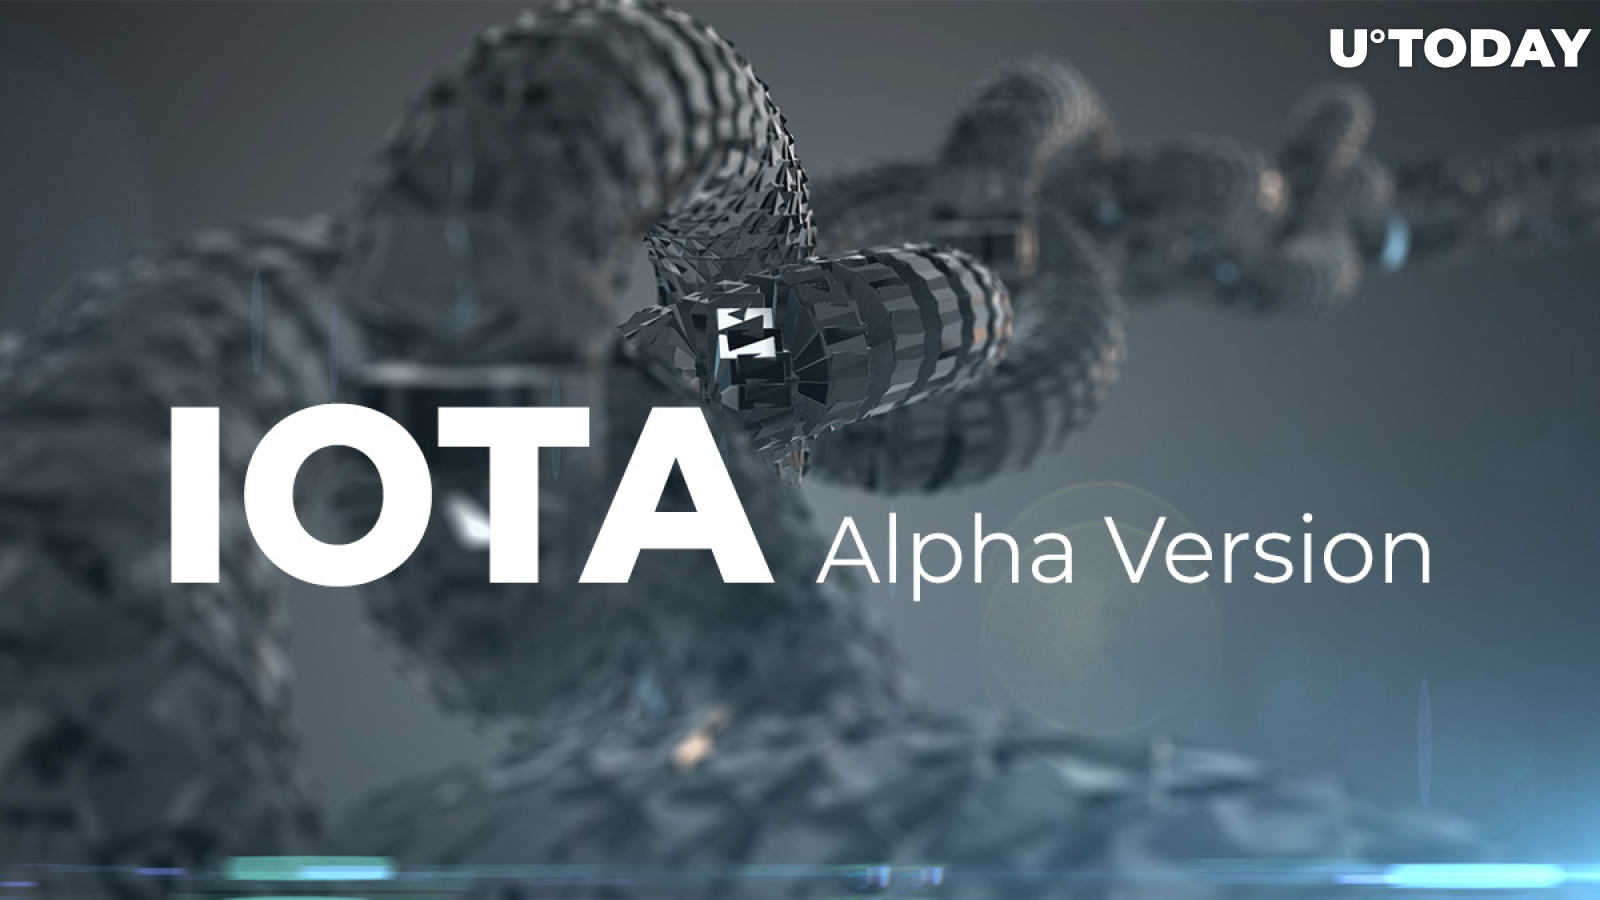 IOTA Announces Final Alpha Version of Its Solution for Decentralized Data Streaming